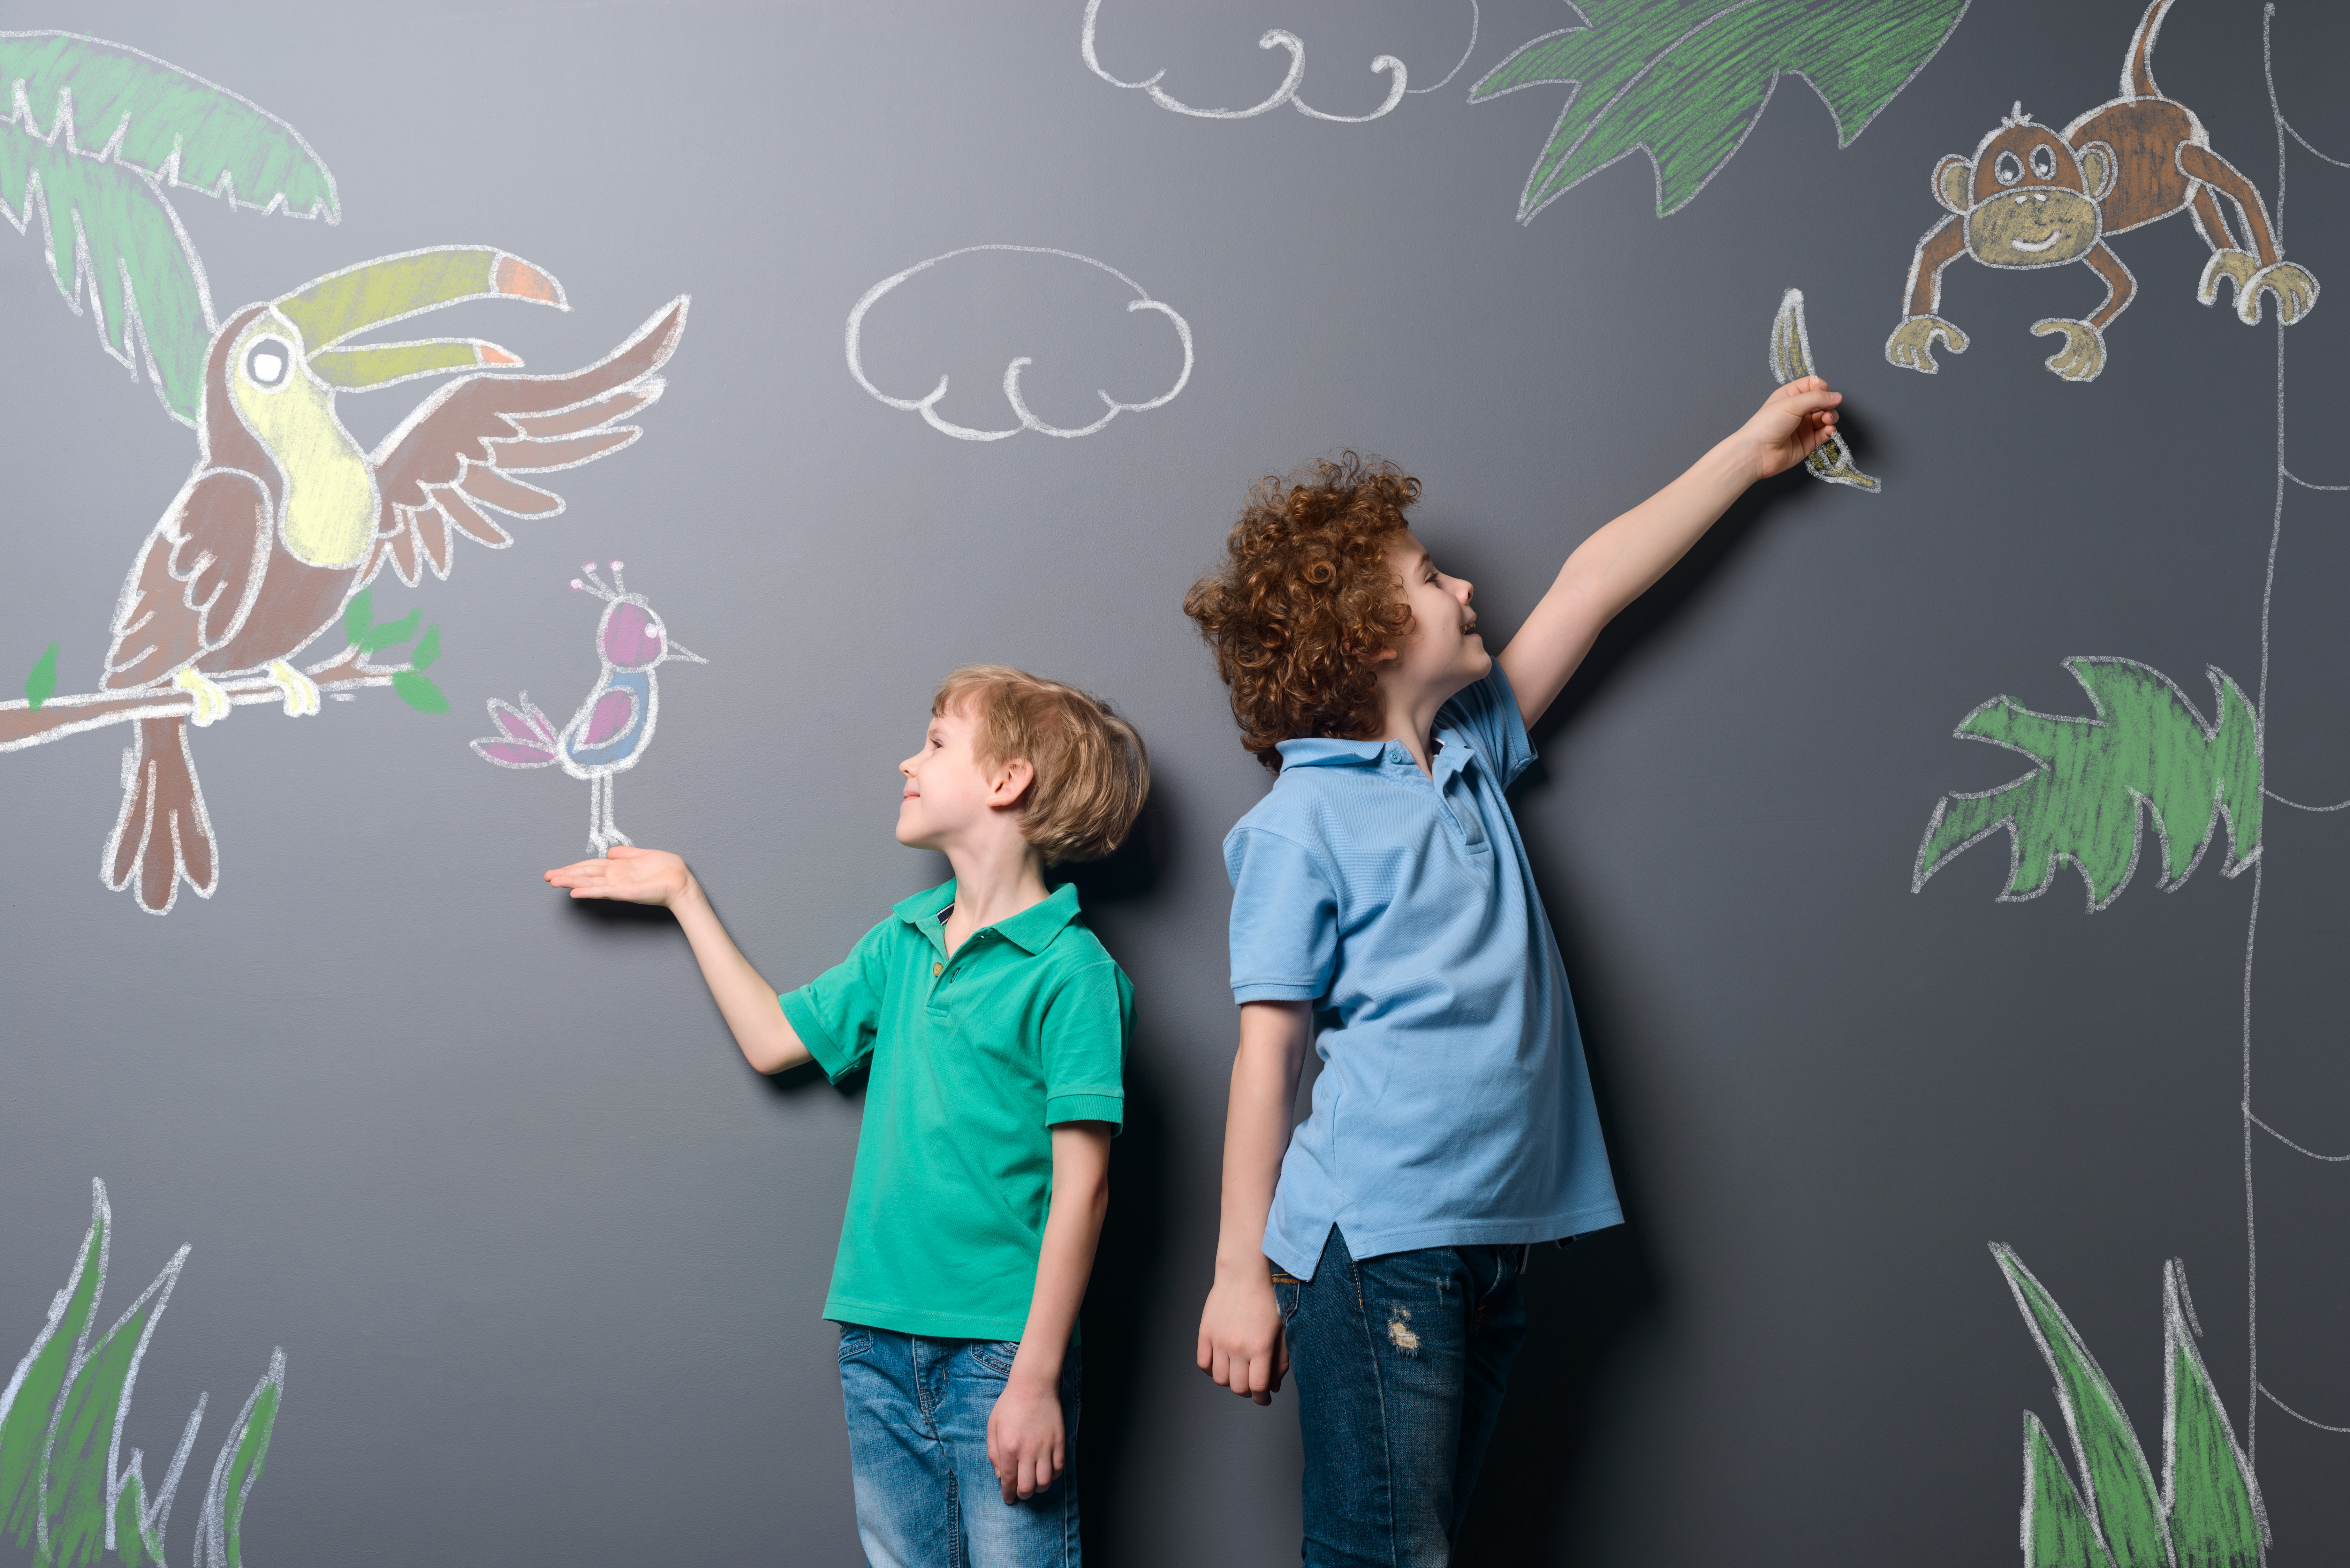 Boys walking through tropic forest. Two brothers feeding beautiful exotic birds and monkey drawn with chalk on a gray wall.